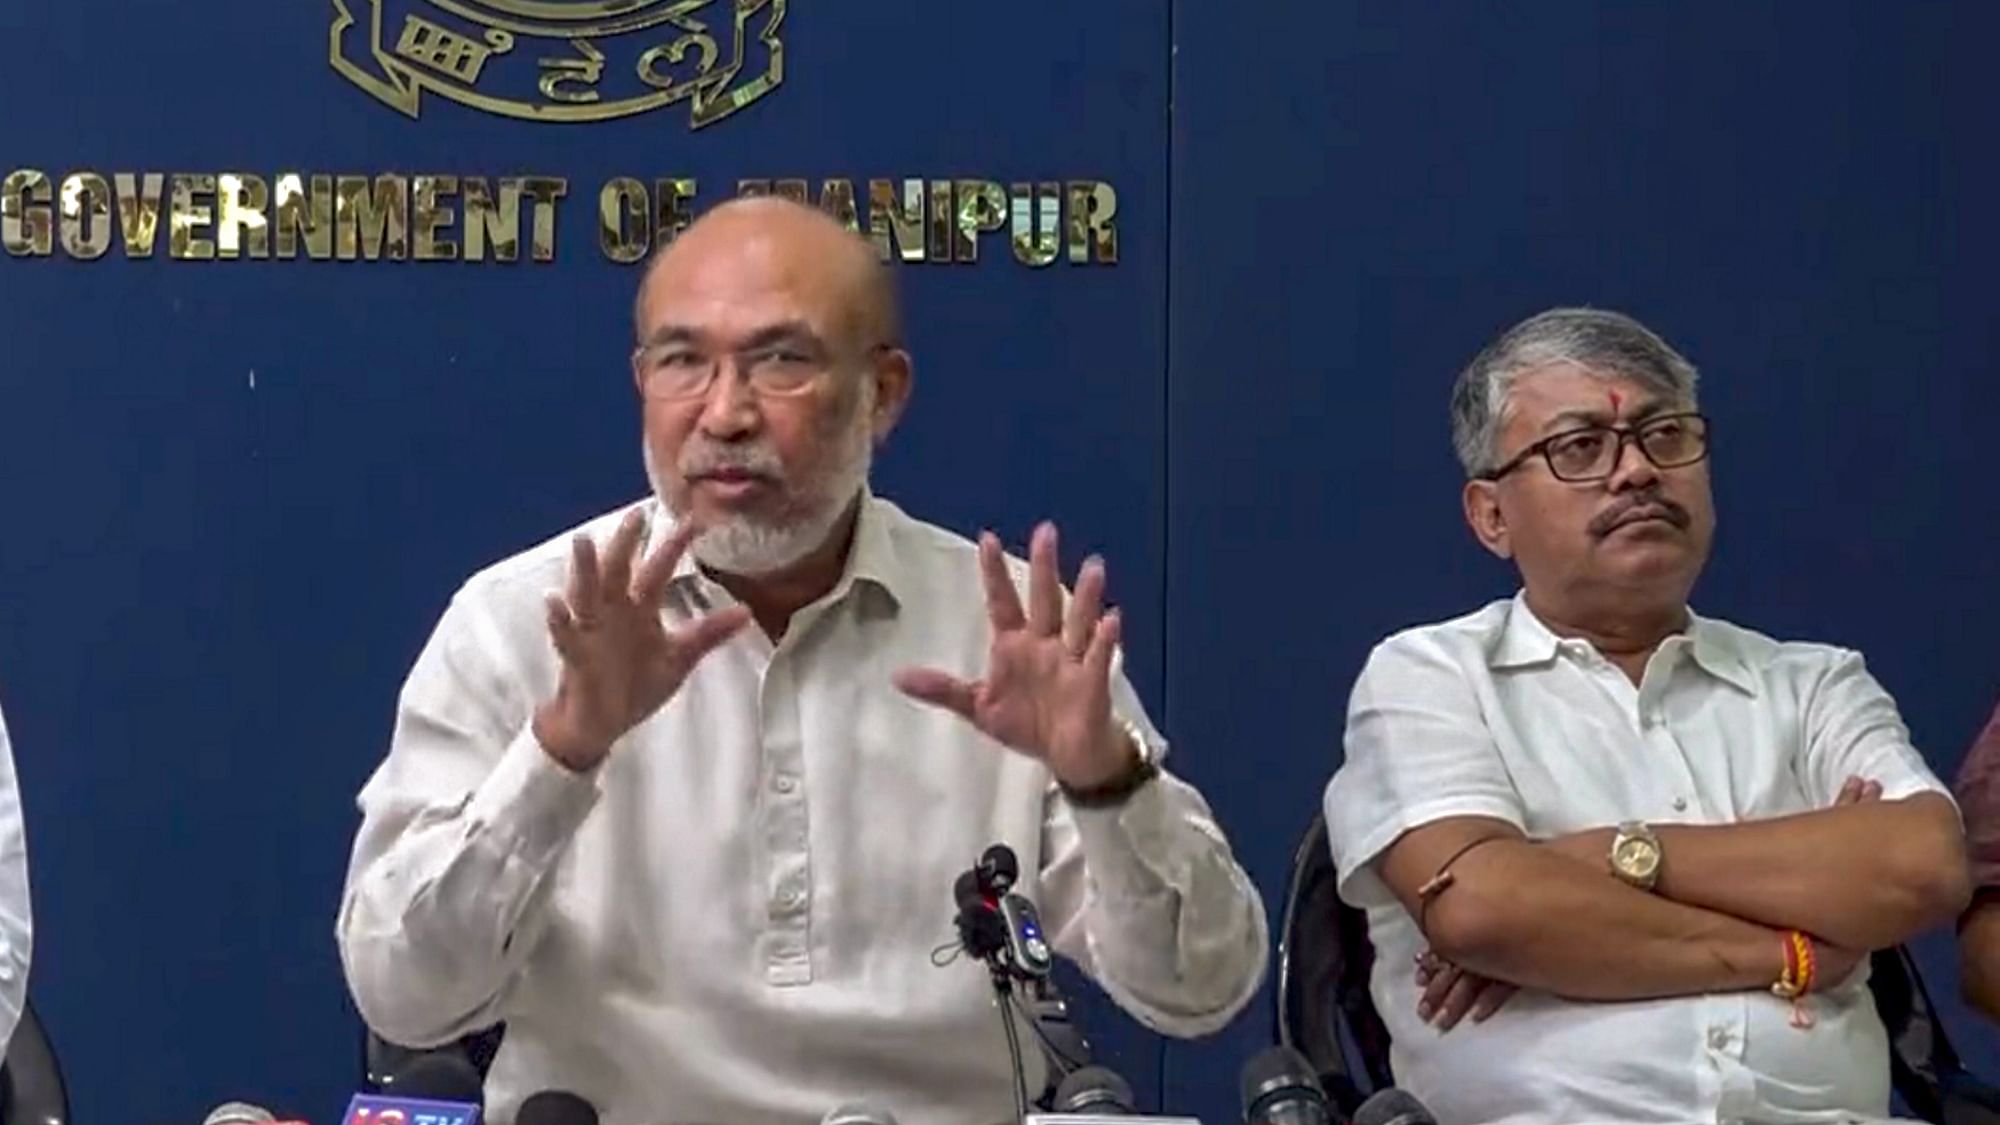 <div class="paragraphs"><p>Manipur Chief Minister N Biren Singh on Monday, 4 September, filed a First Information Report (FIR) against the four members of the Editors Guild of India (EGI), including its president, for "trying to create more clashes in the state of Manipur."</p></div>